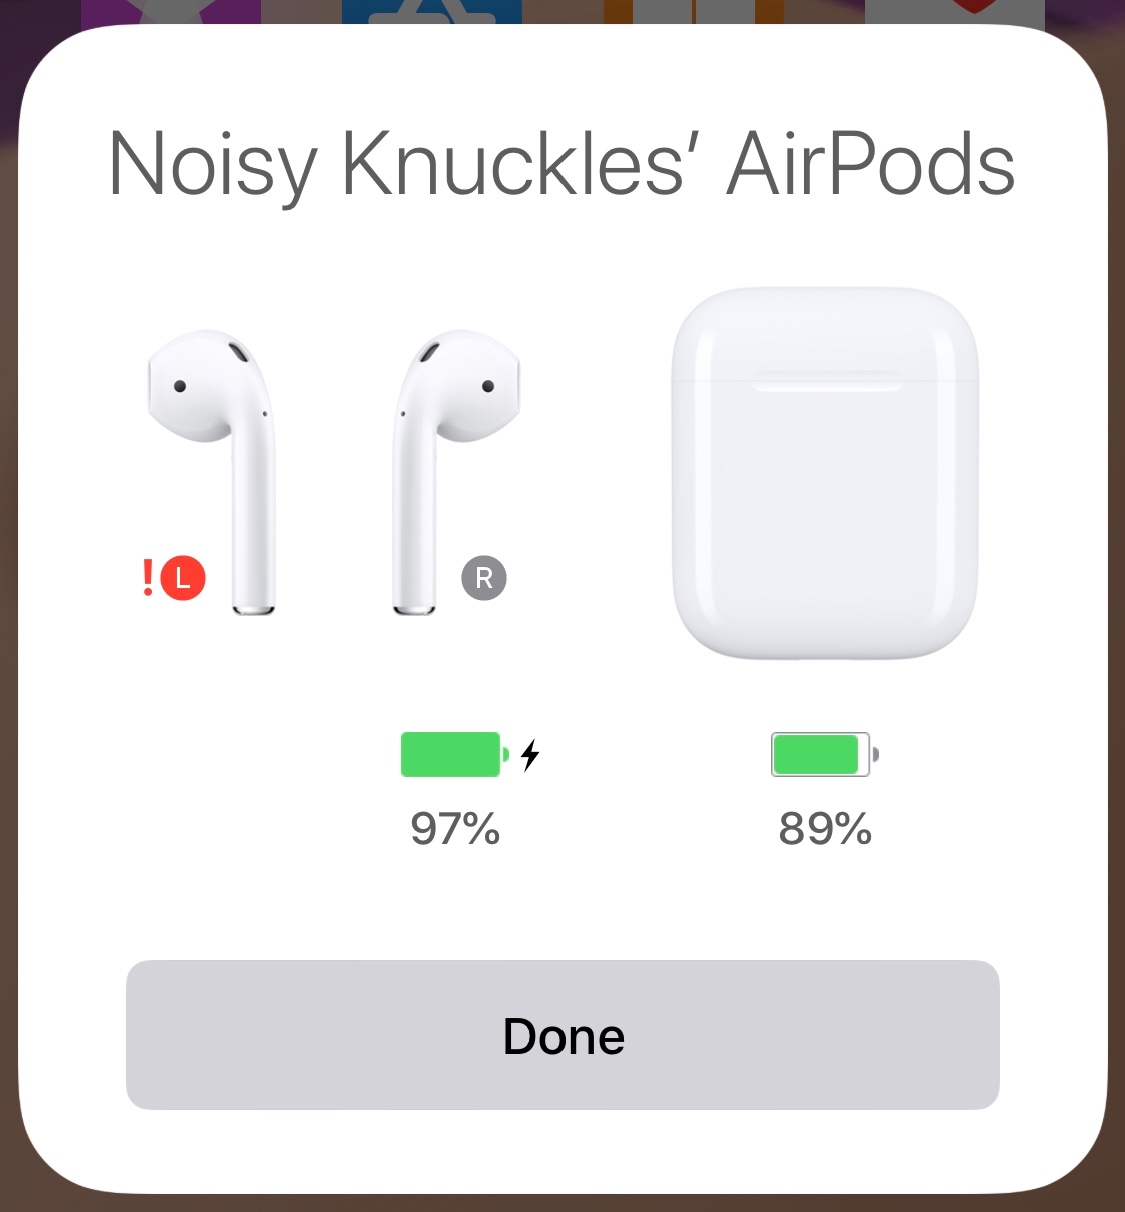 død Moderne Ananiver Left AirPod not working after accident - Apple Community